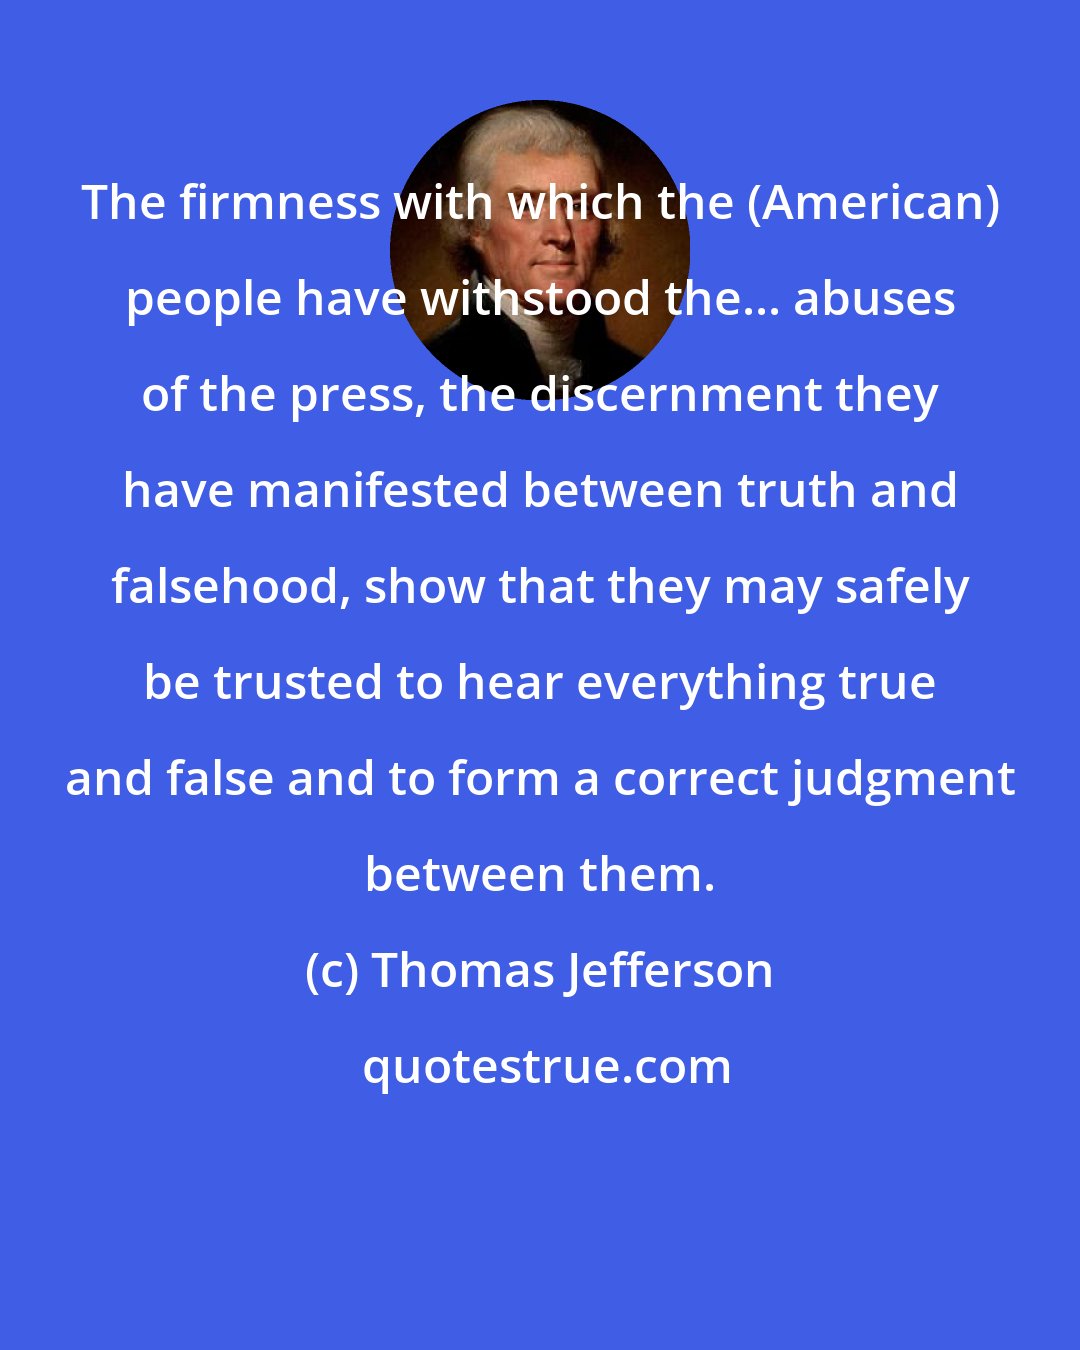 Thomas Jefferson: The firmness with which the (American) people have withstood the... abuses of the press, the discernment they have manifested between truth and falsehood, show that they may safely be trusted to hear everything true and false and to form a correct judgment between them.